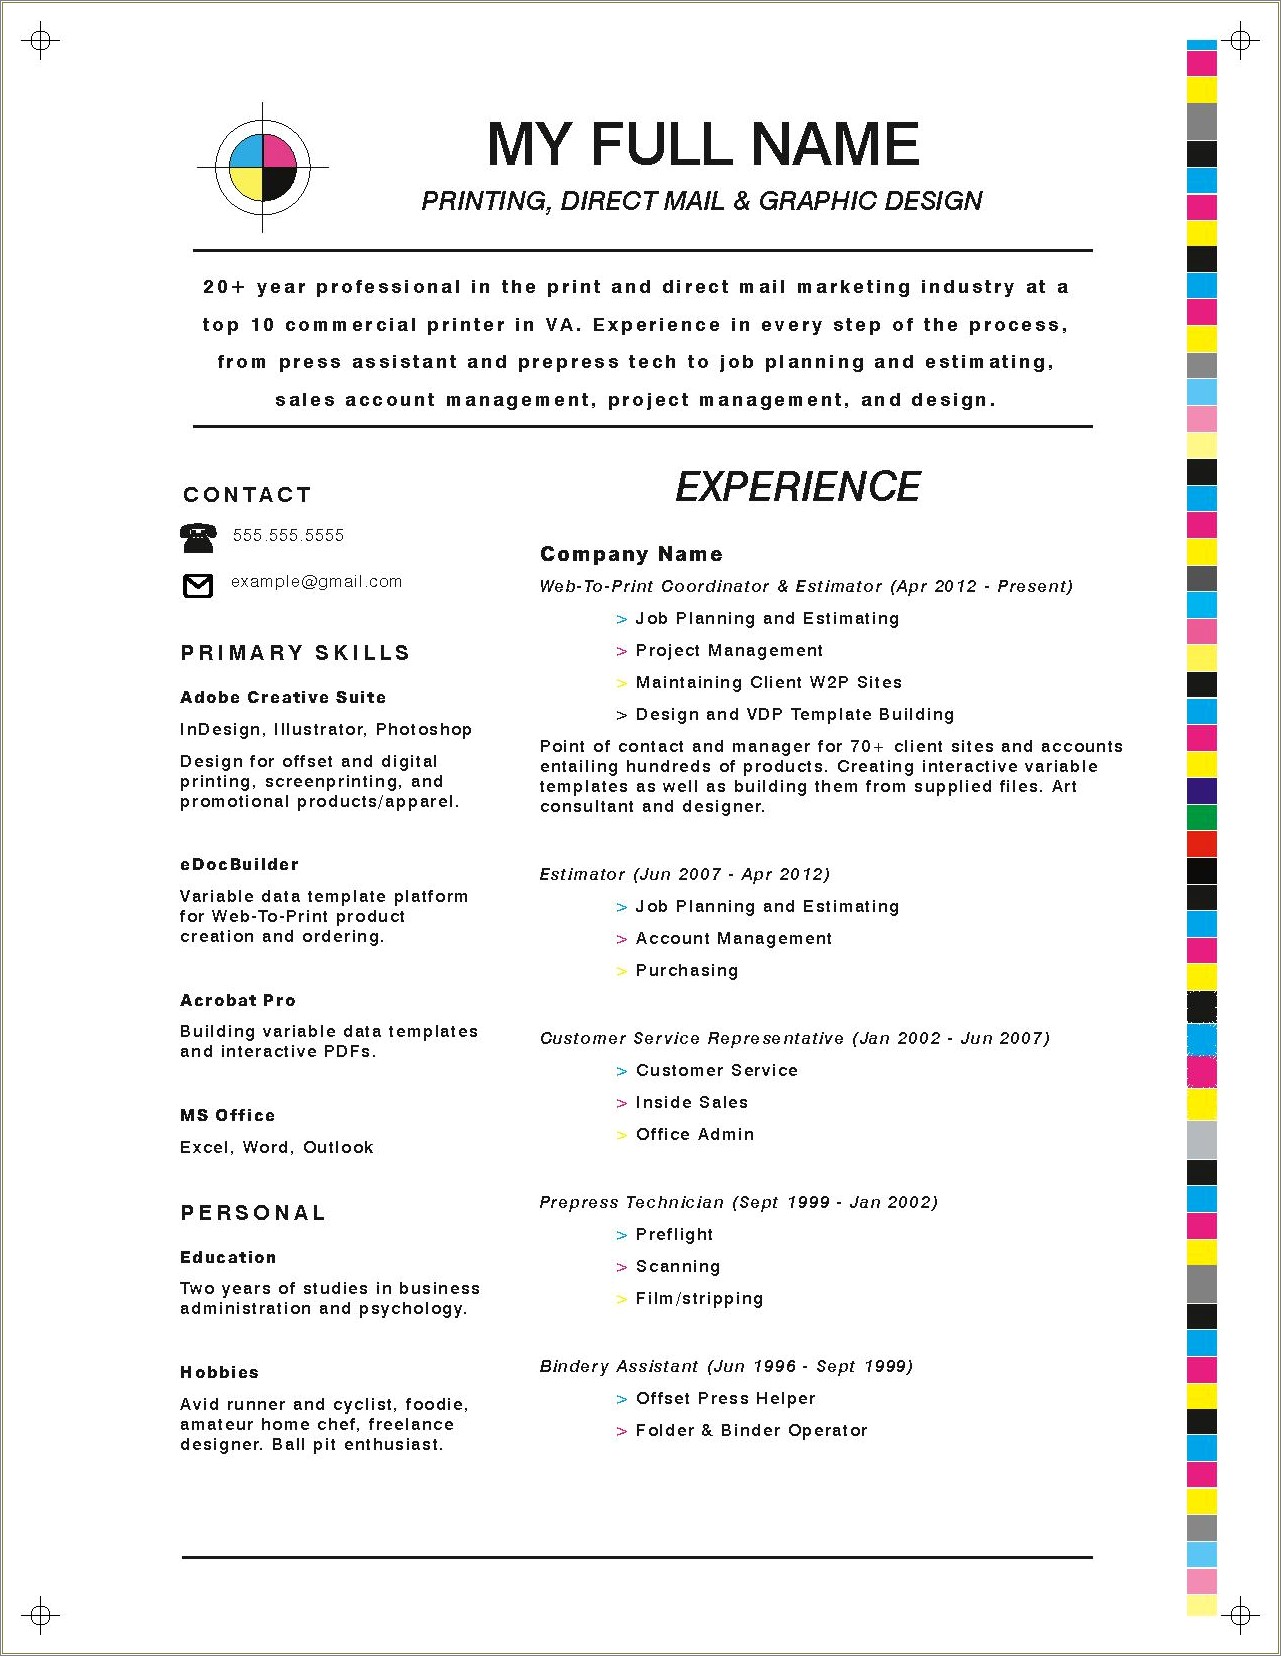 Sample Resume For Print Production Manager